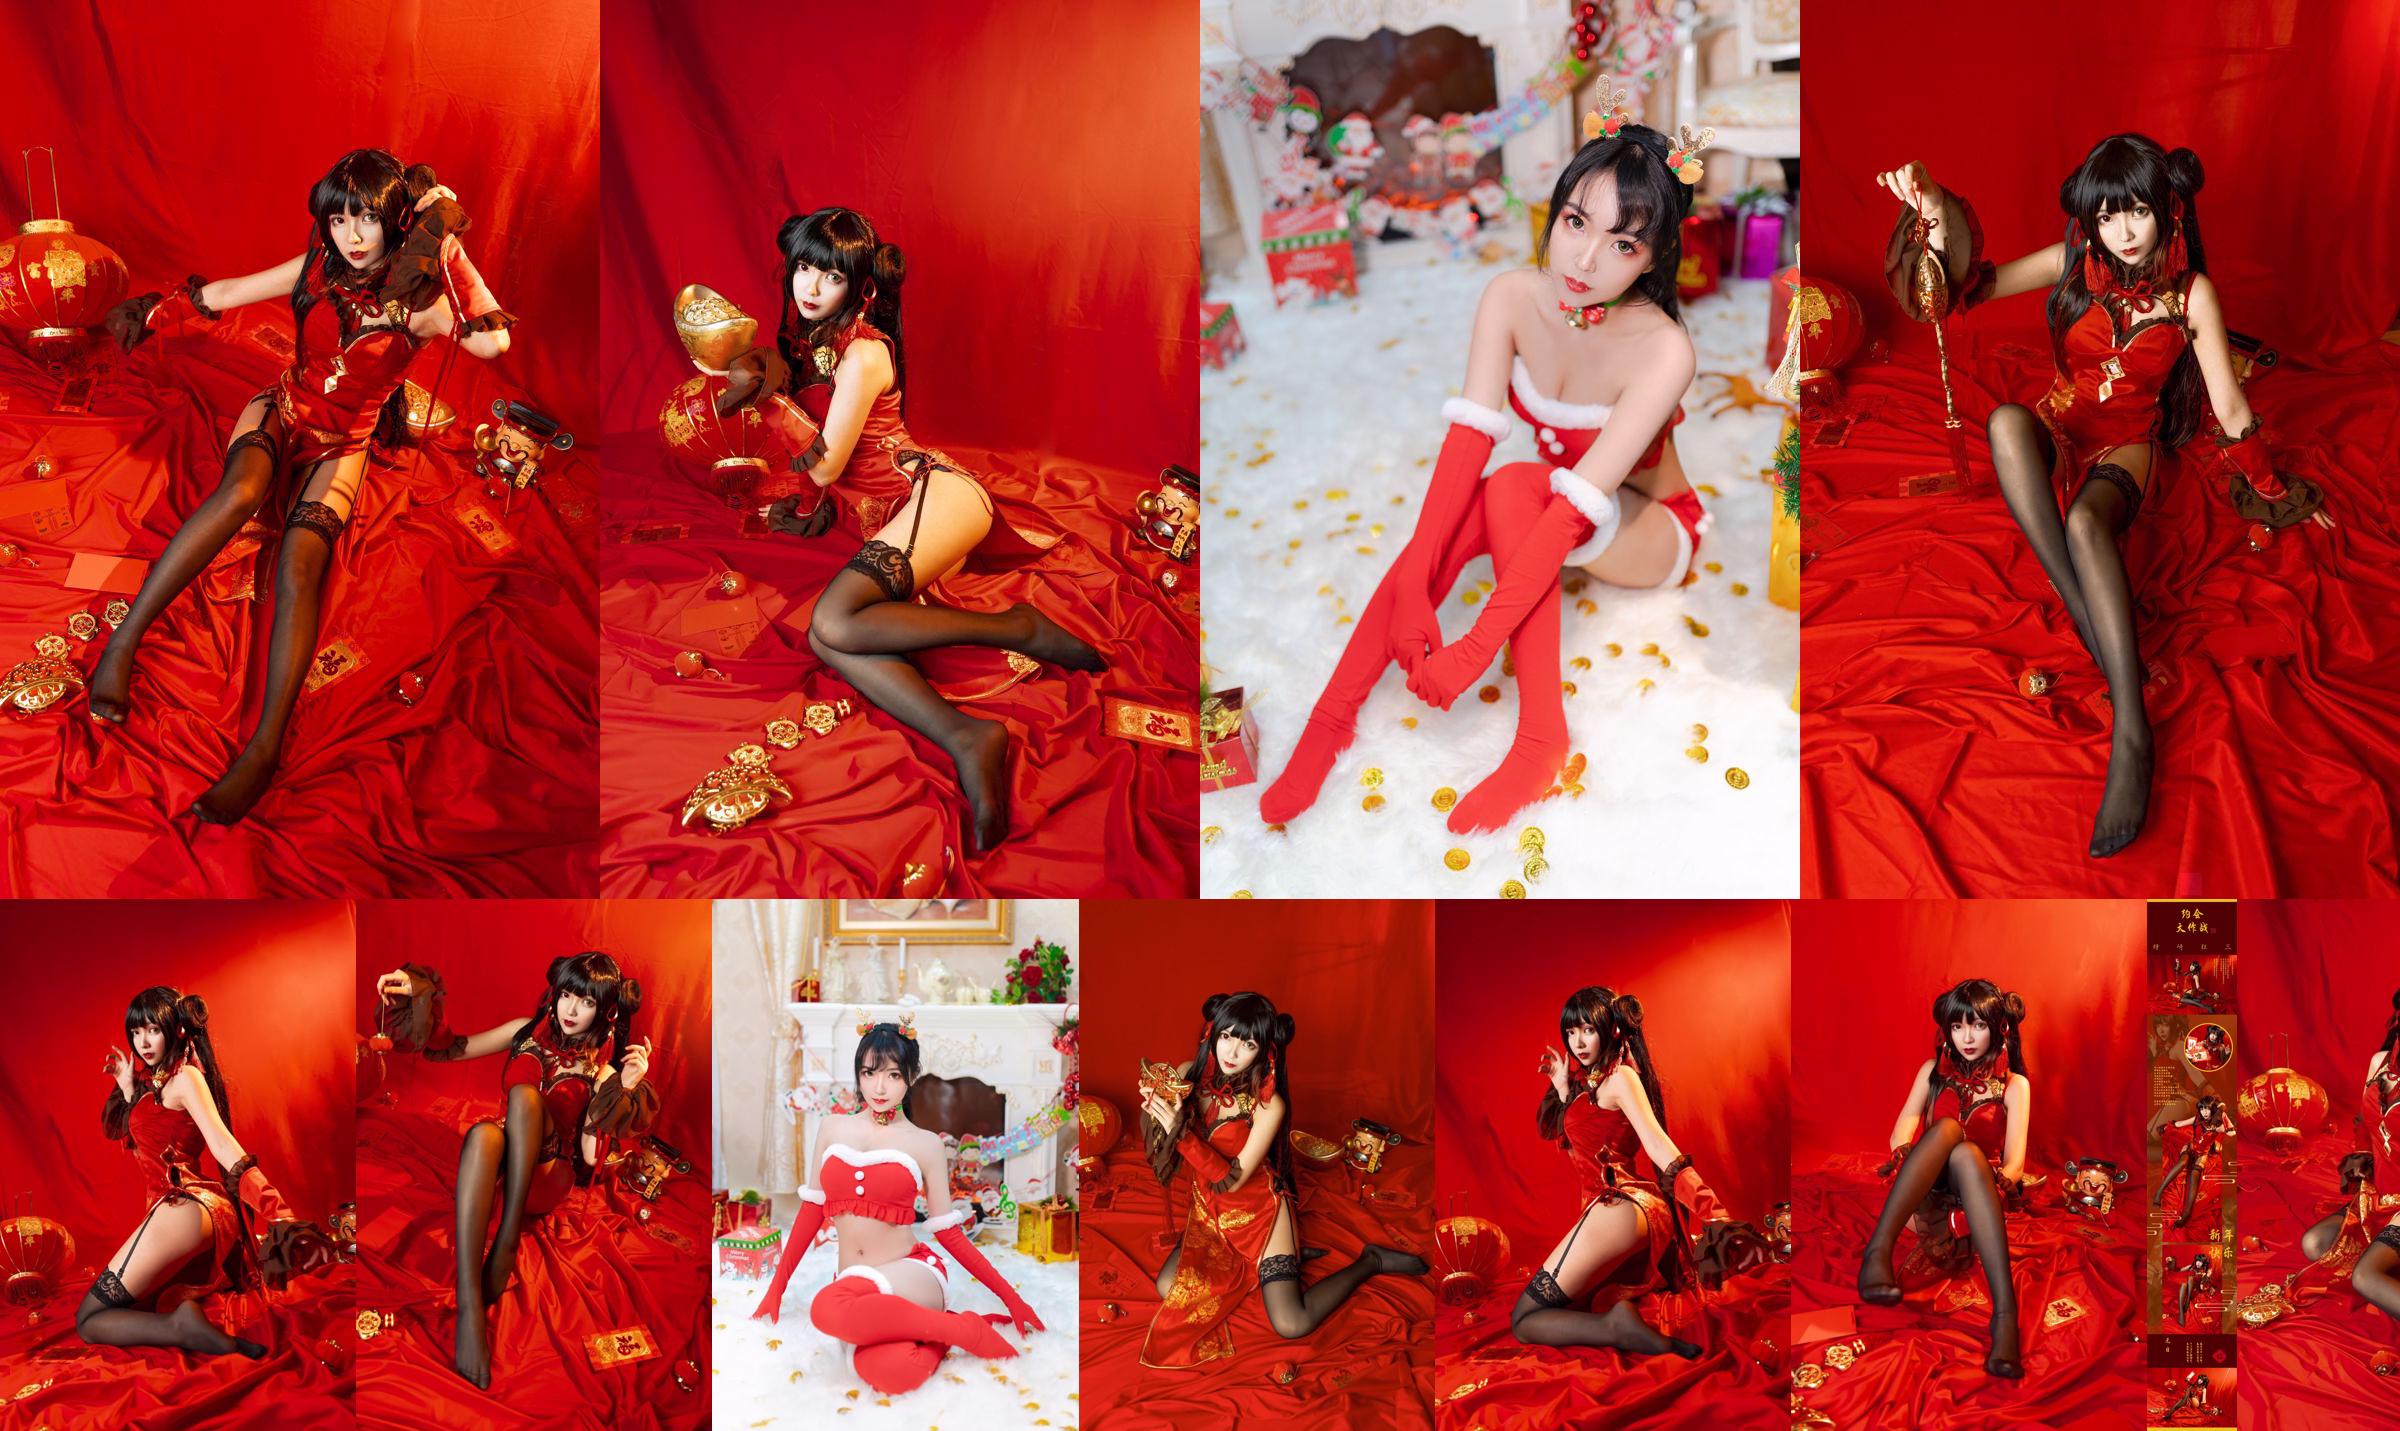 Coser model Yeonko is indestructible "Crazy Three New Year" No.4a8b69 Page 8